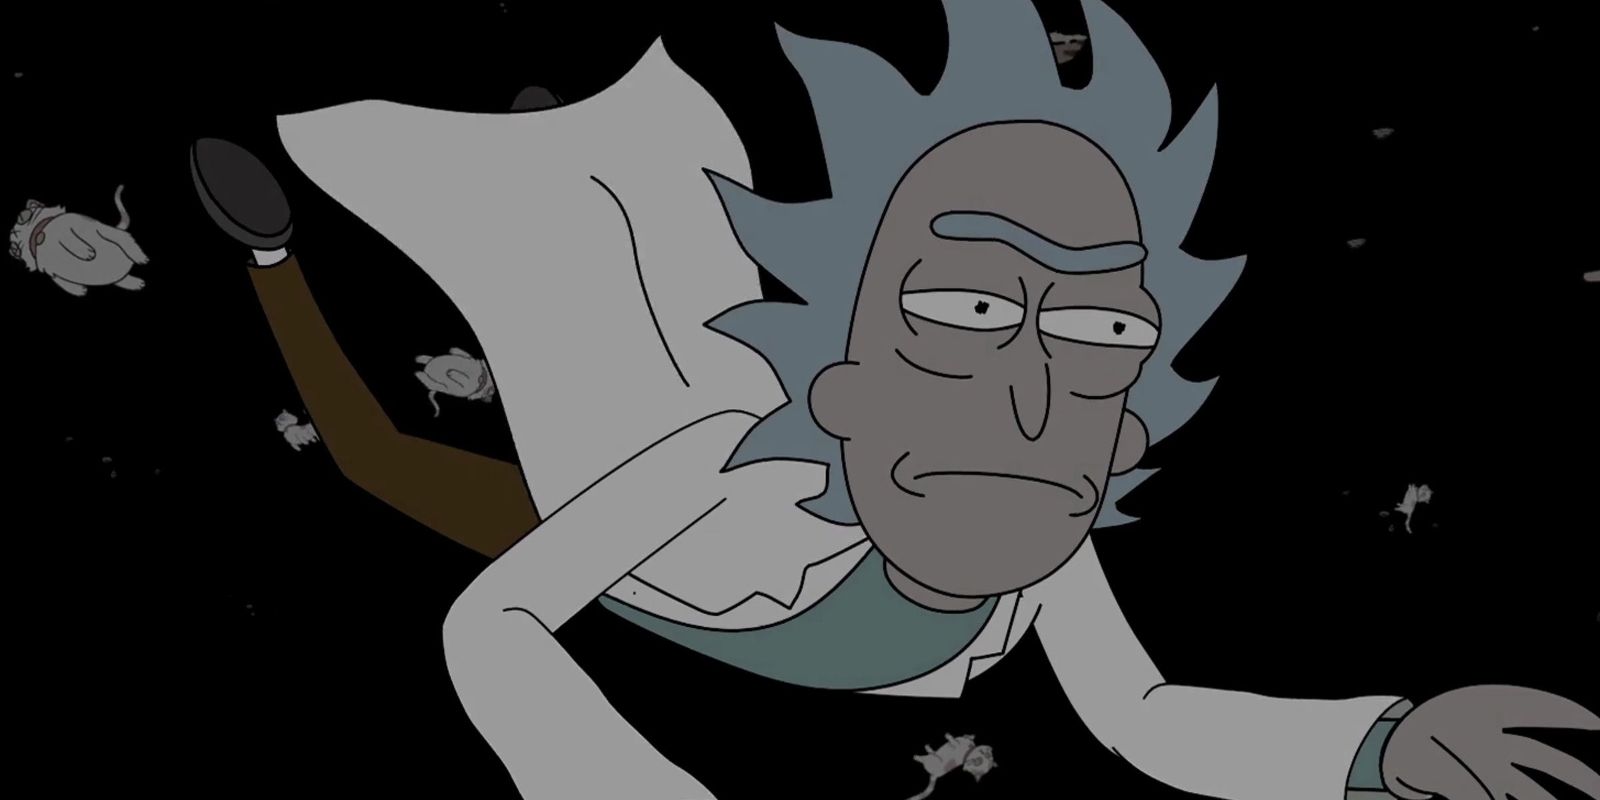 Rick floating in space after giving Morty his timeline collar in Rick and Morty,